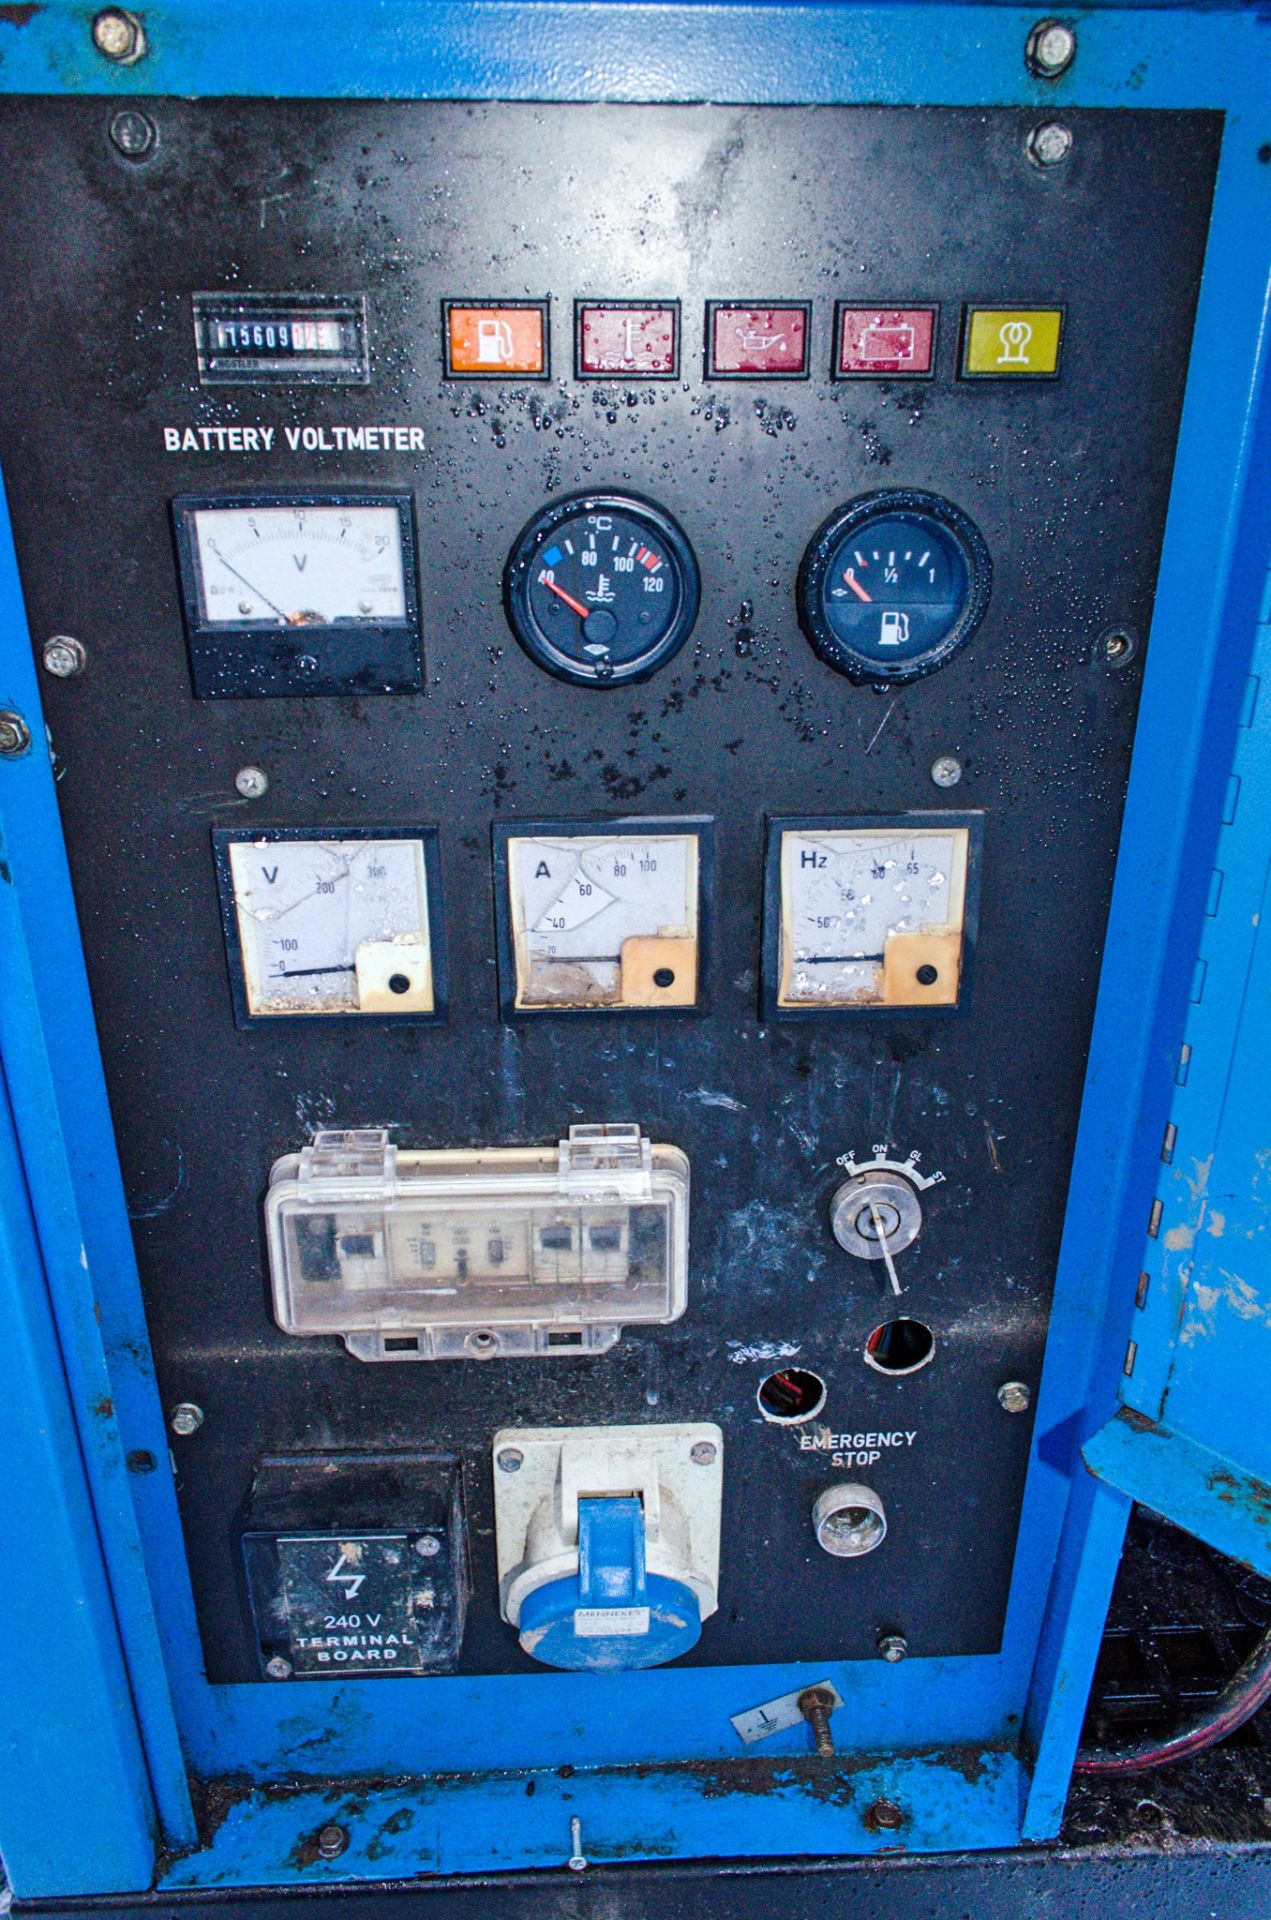 Genset MGMK 10000 10 kva static diesel driven generator Recorded Hours: 15609 MS2565 - Image 5 of 5